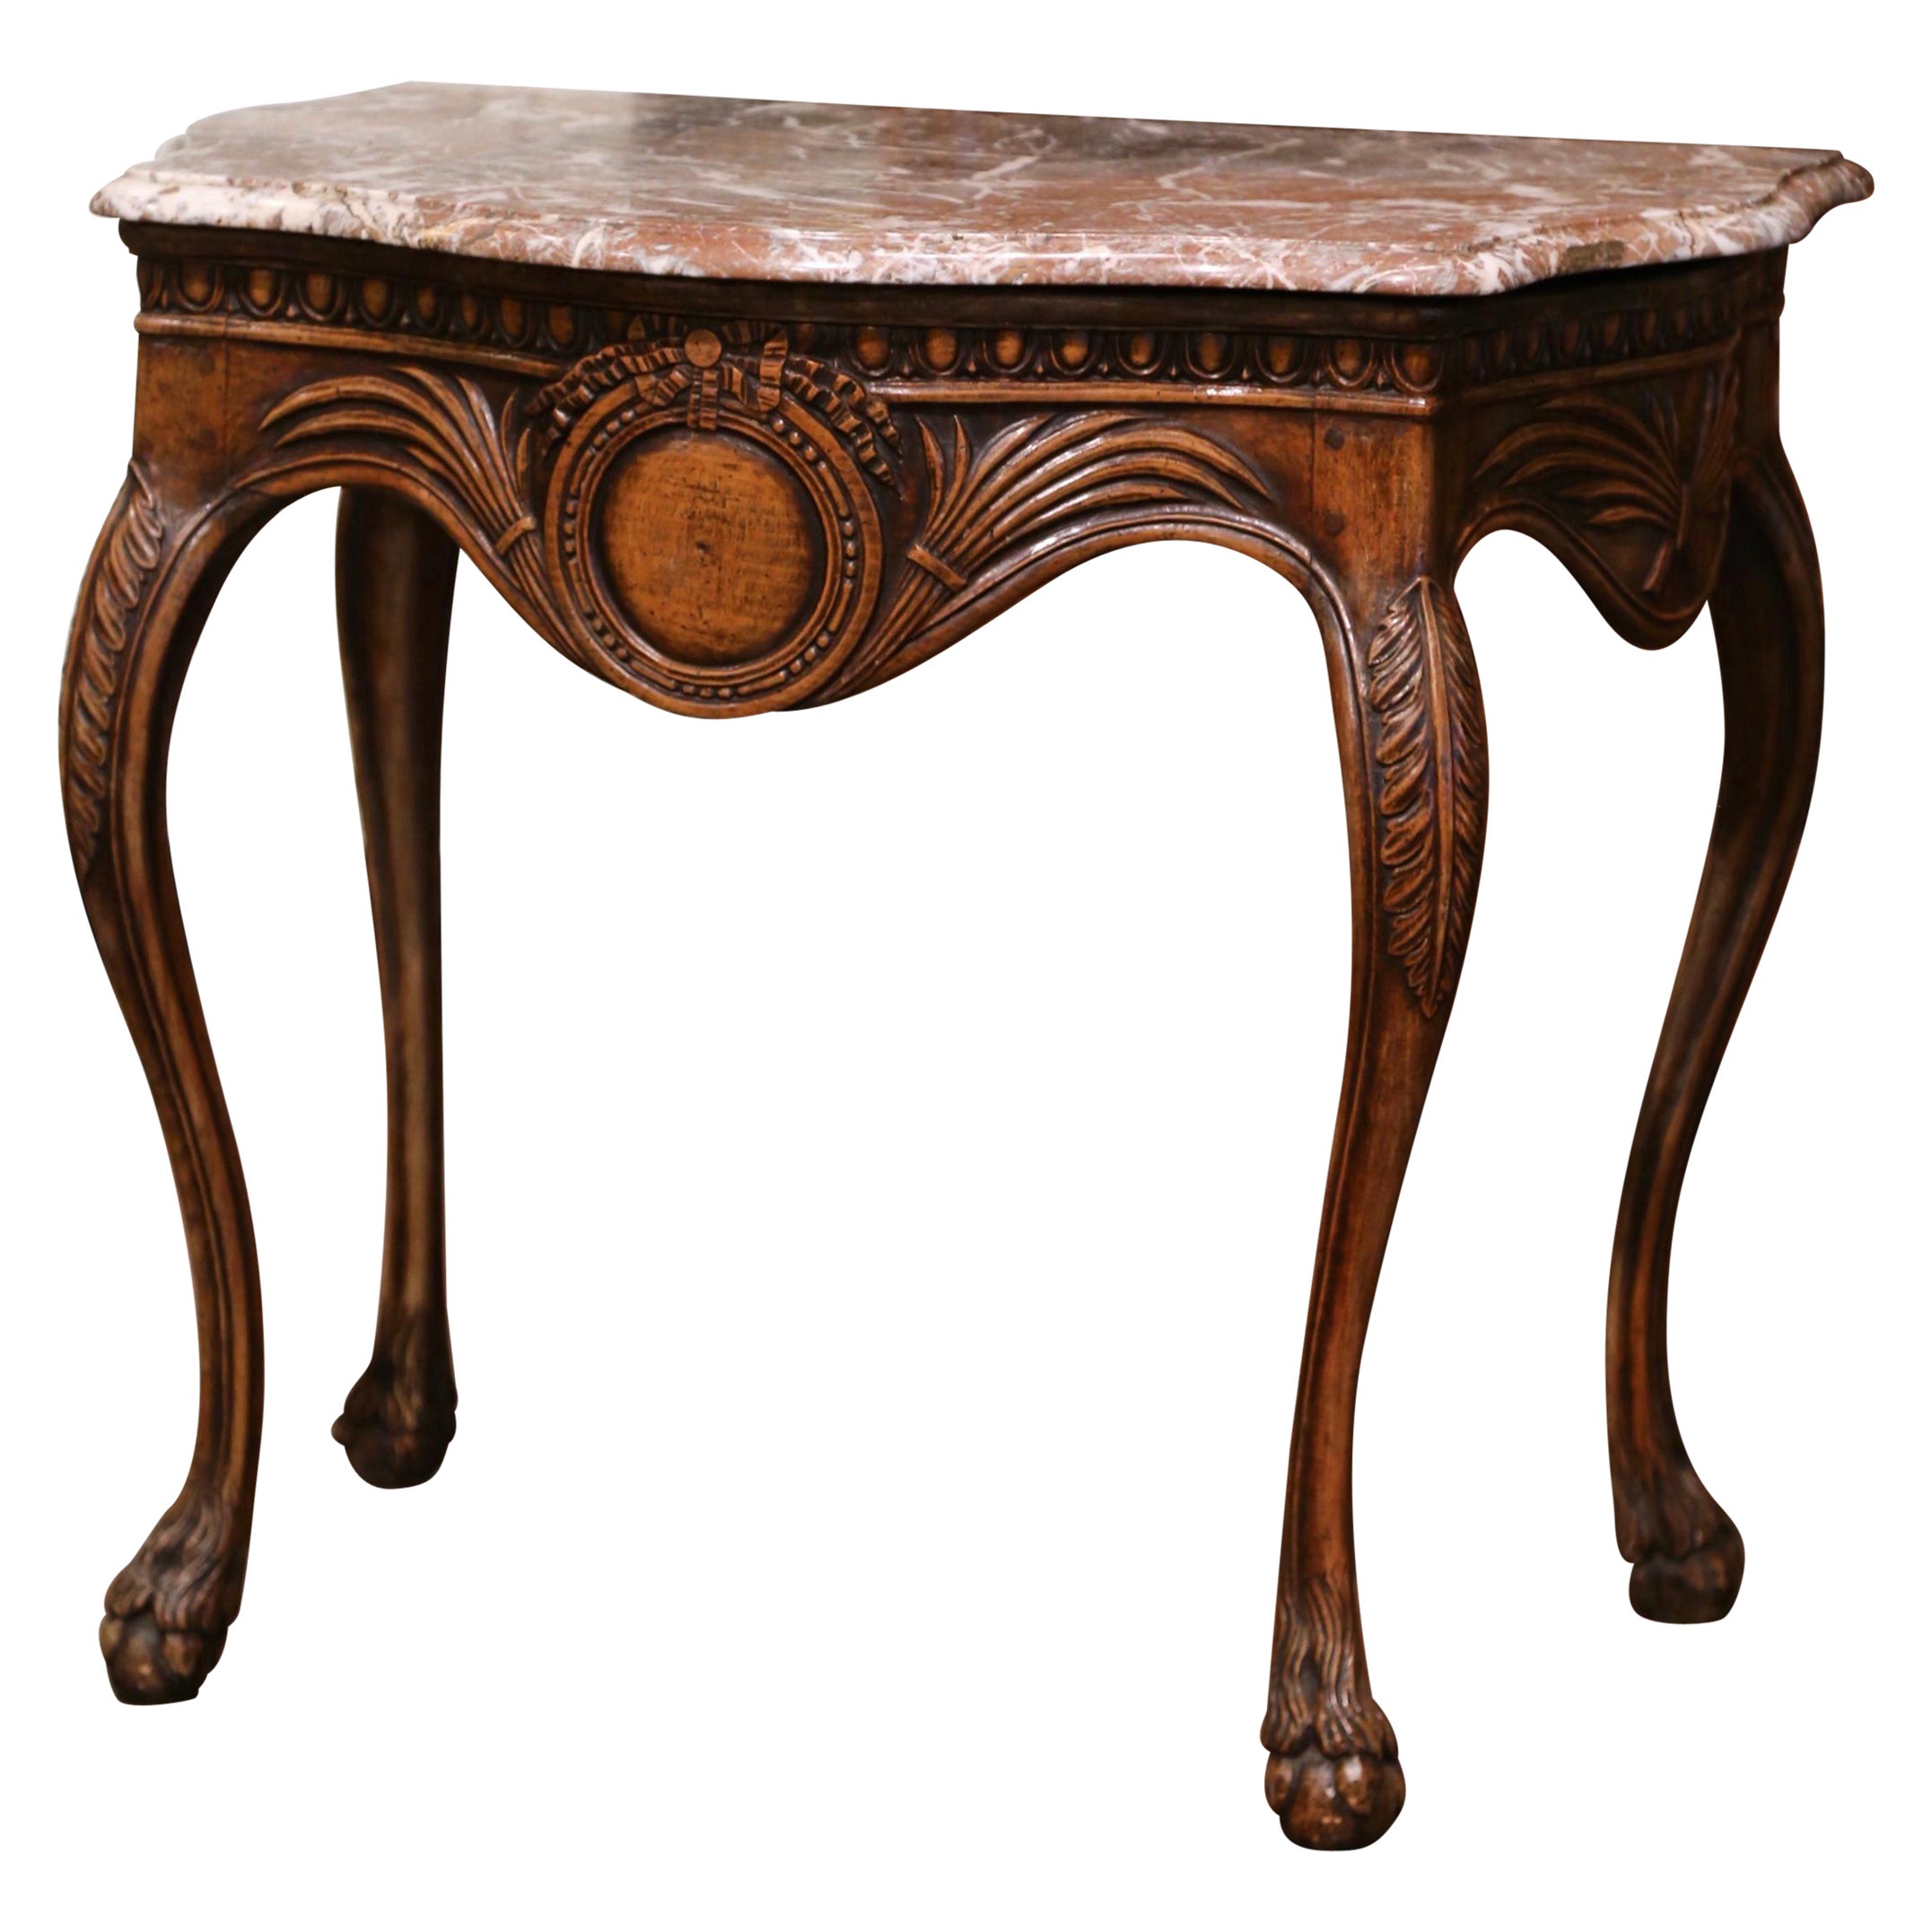 18th Century French Louis XV Provencal Carved Walnut and Marble Console Table